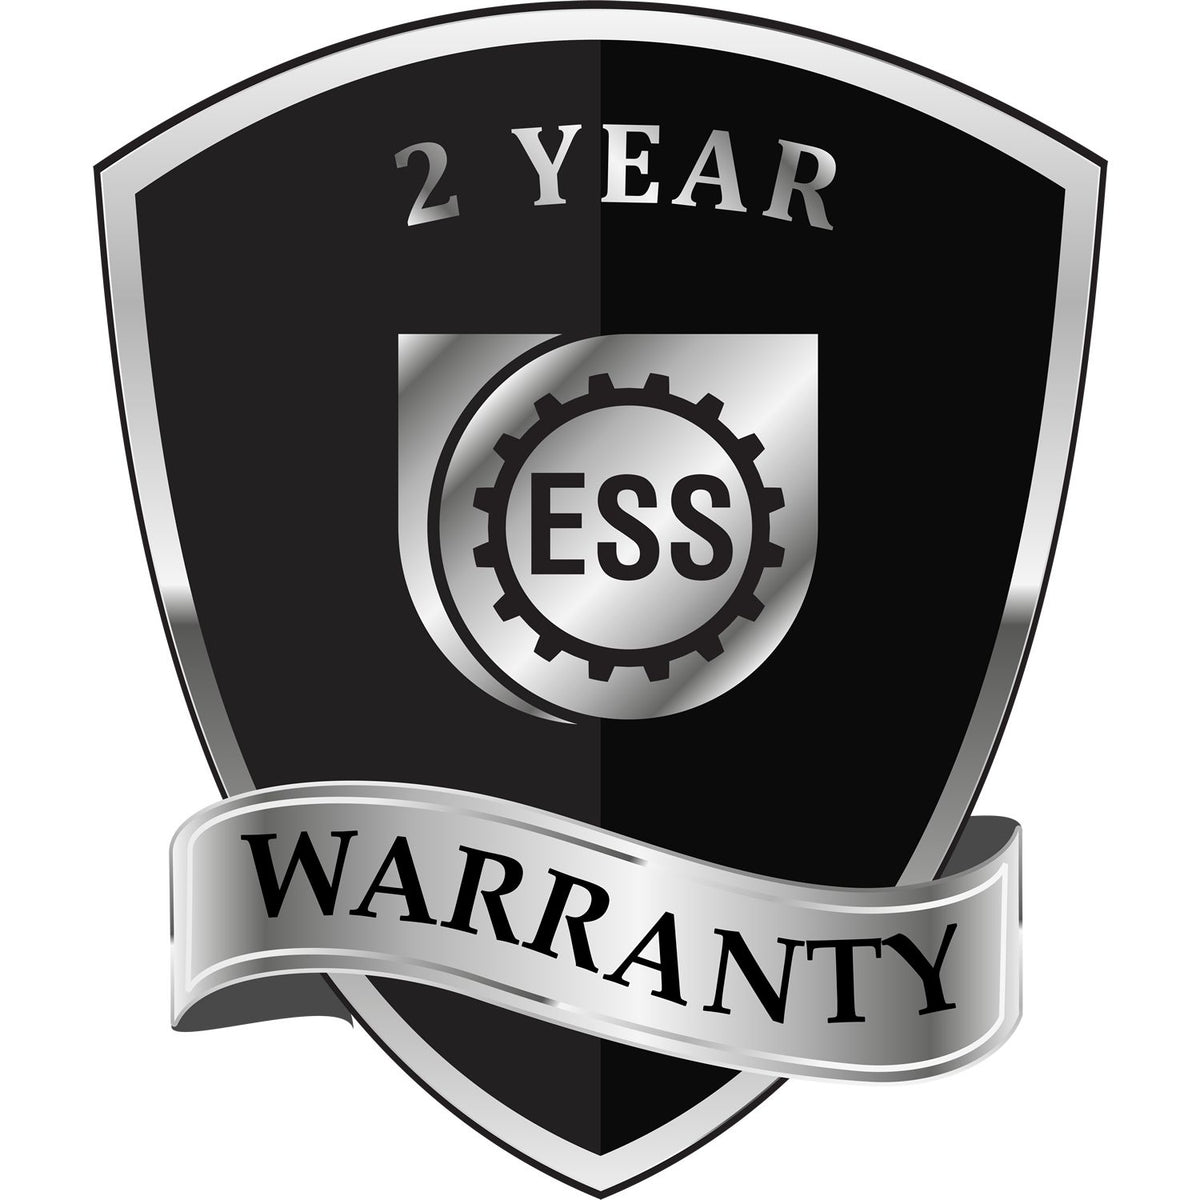 A badge or emblem showing a warranty icon for the State of New York Extended Long Reach Engineer Seal